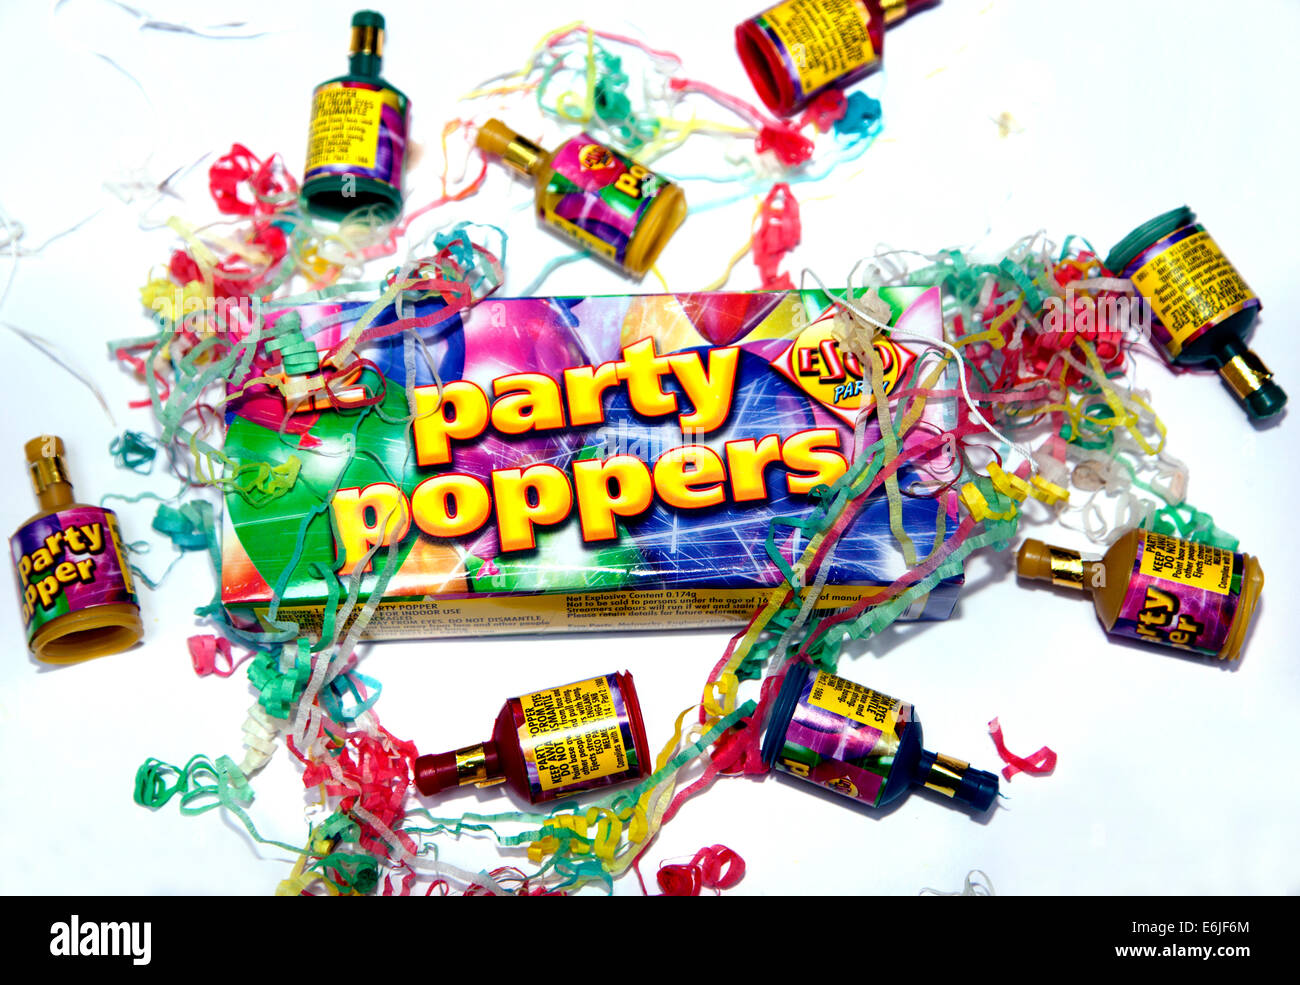 Party poppers, London Stock Photo